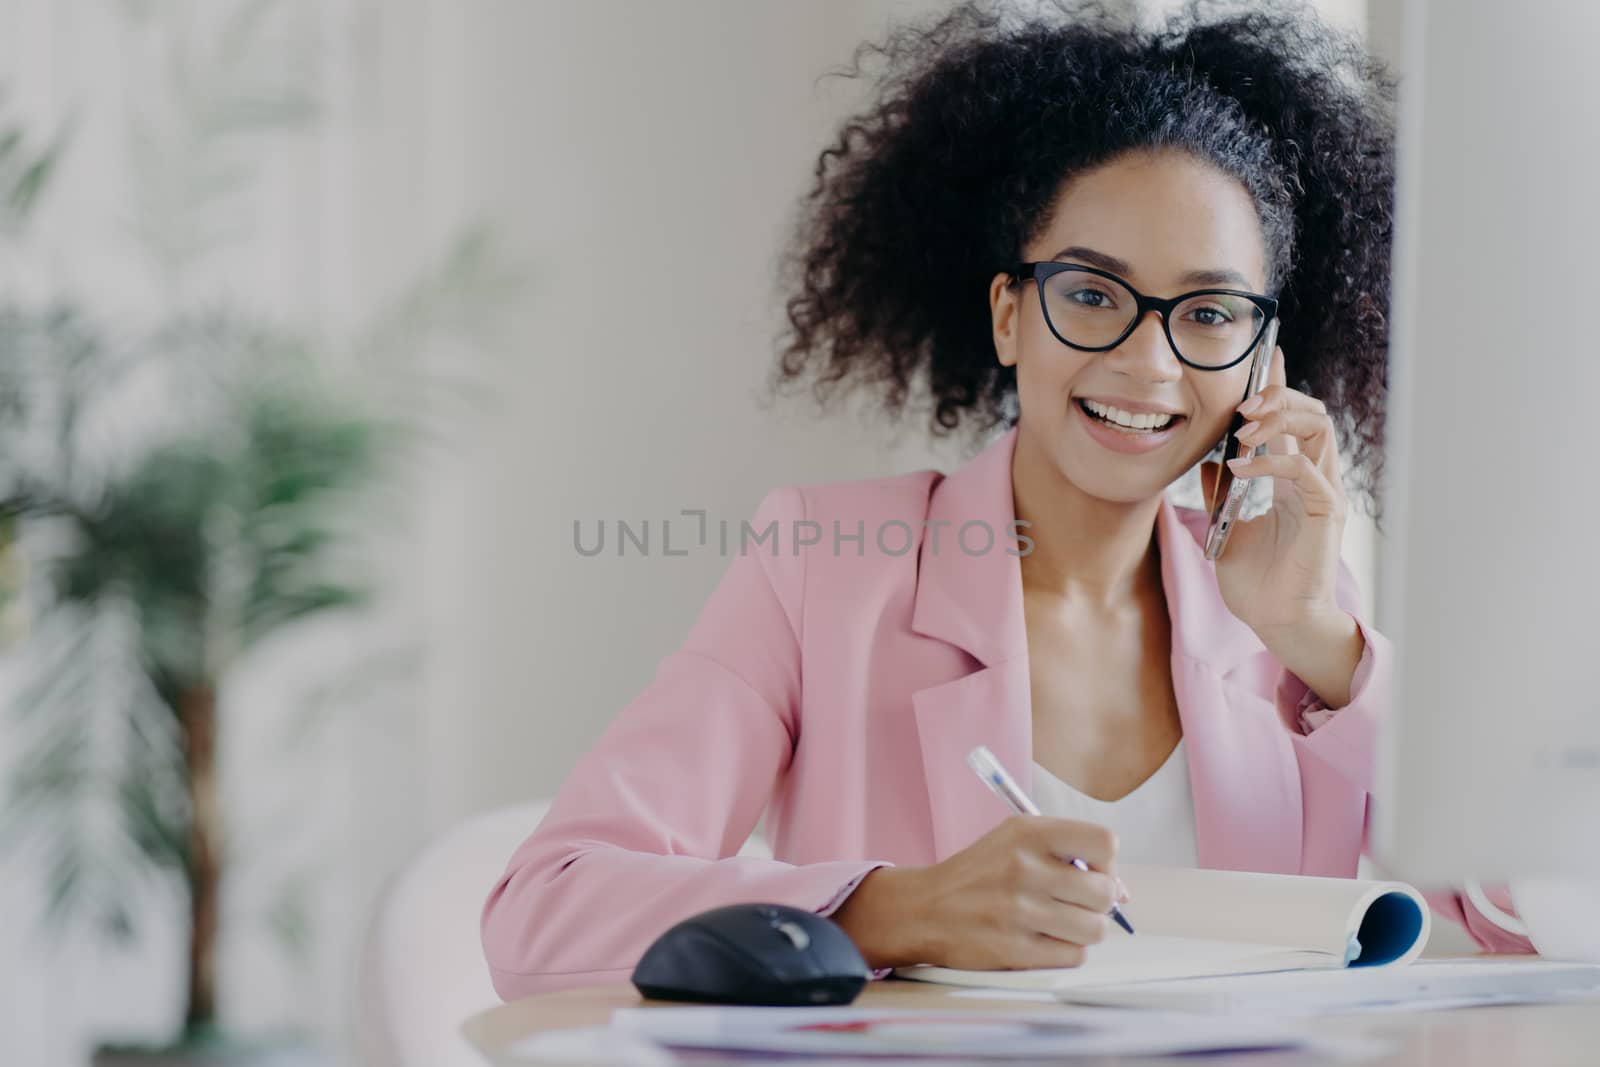 Happy African American woman with curly hairstyle, writes some information, speaks via cell phone, sits at desk against blurred office background. People, technology, communication, business concept by vkstock